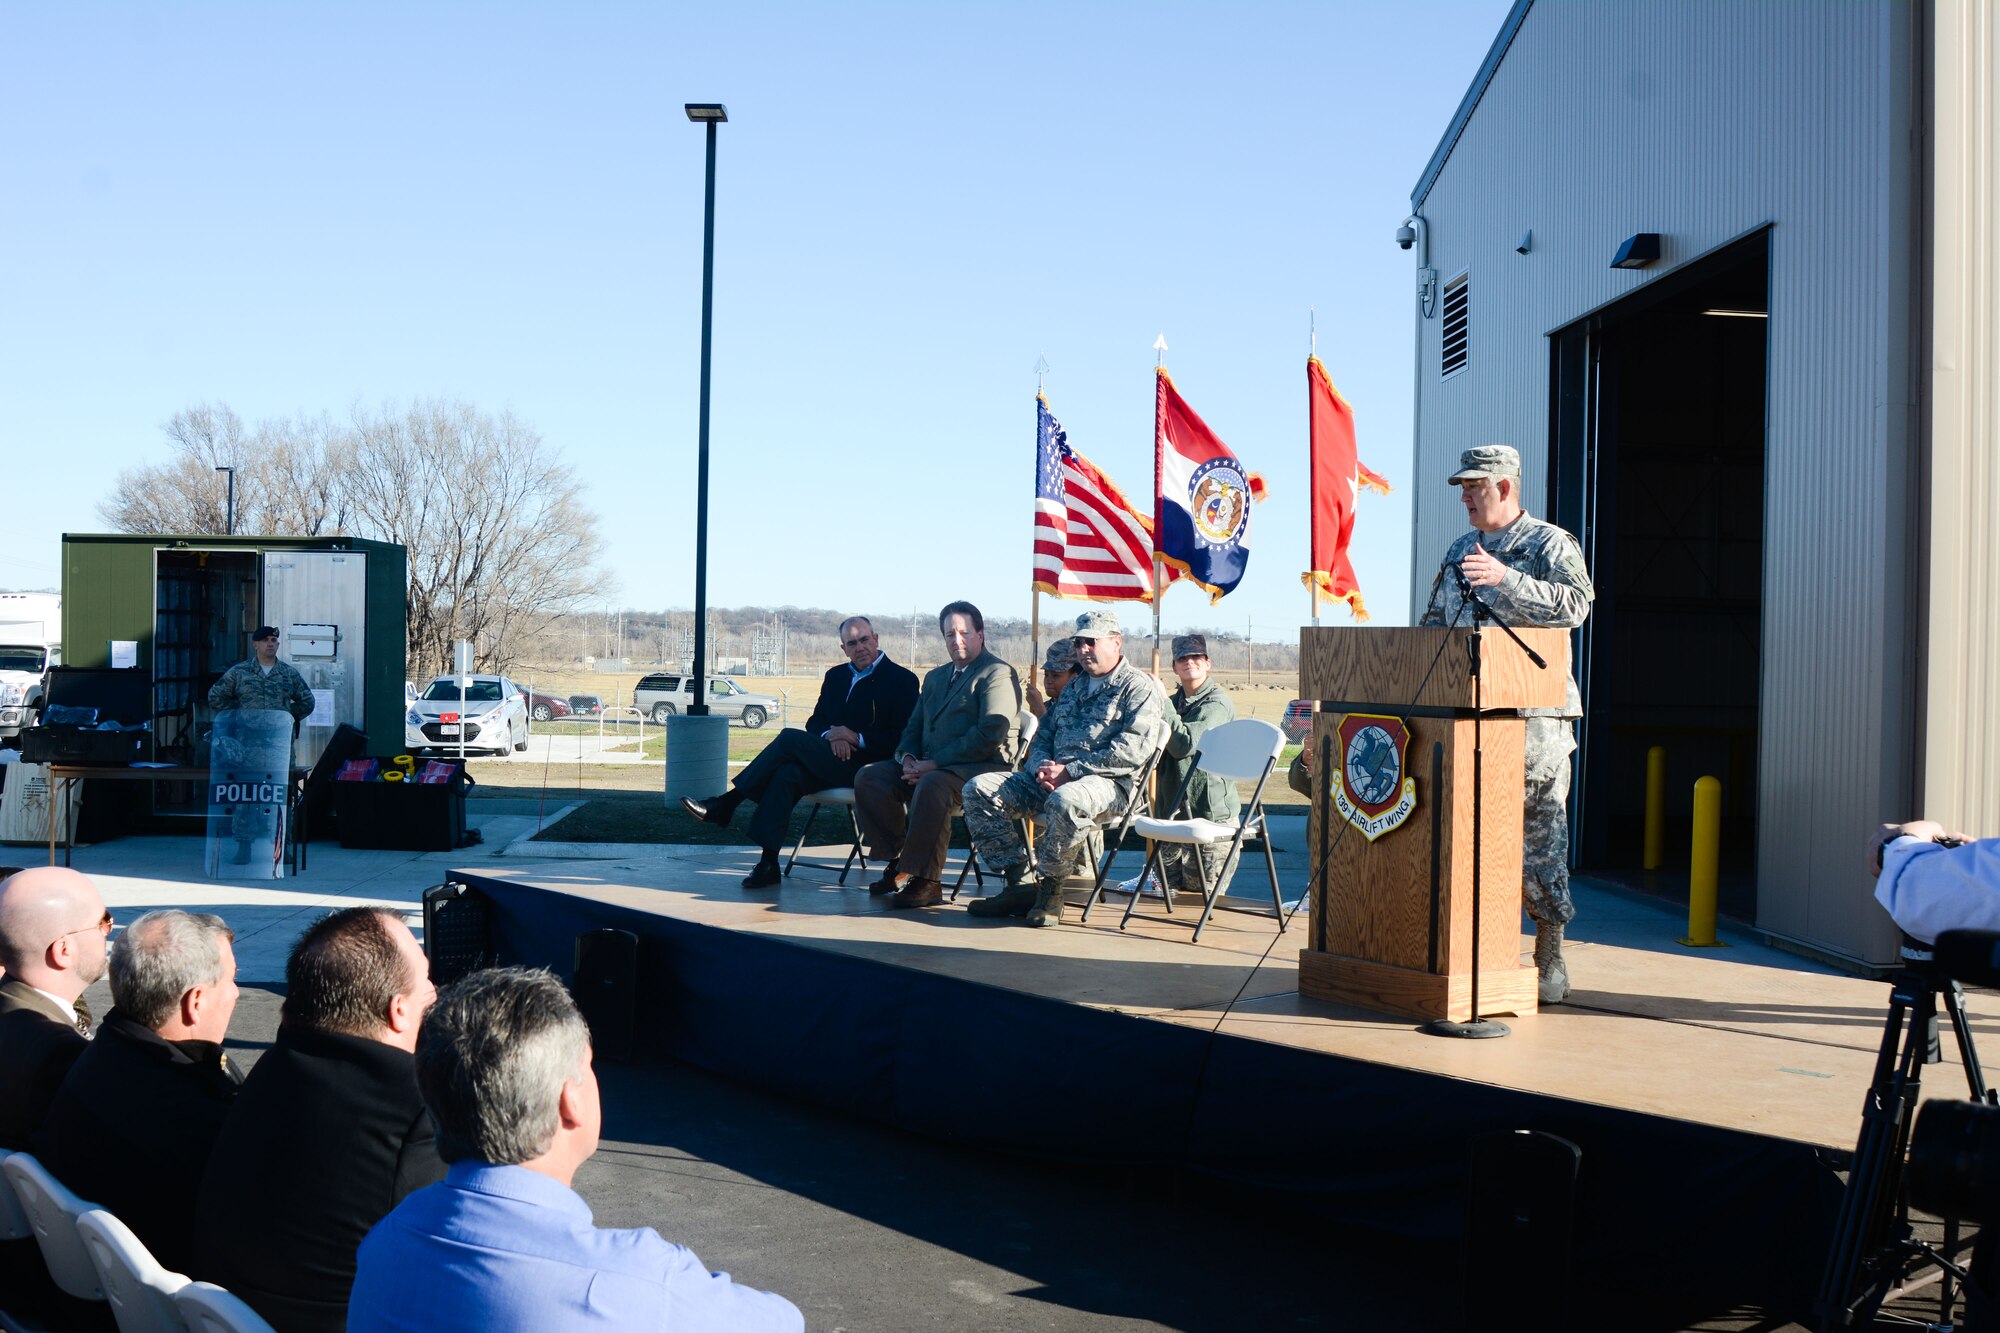 U.S. Army Maj. Gen. Stephen L. Danner, the adjutant general of the Missouri National Guard, speaks at a ribbon cutting ceremony at Rosecrans Air National Guard Base, St. Joseph, Mo., Dec. 10, 2015. The ceremony was for the opening of the 139th Airlift Wing’s new security forces building. The building is 6,000 square feet and will be used by the 139th Security Forces Squadron which is responsible for protecting the wing’s personnel and property. (U.S. Air National Guard photo by Tech. Sgt. Michael Crane)